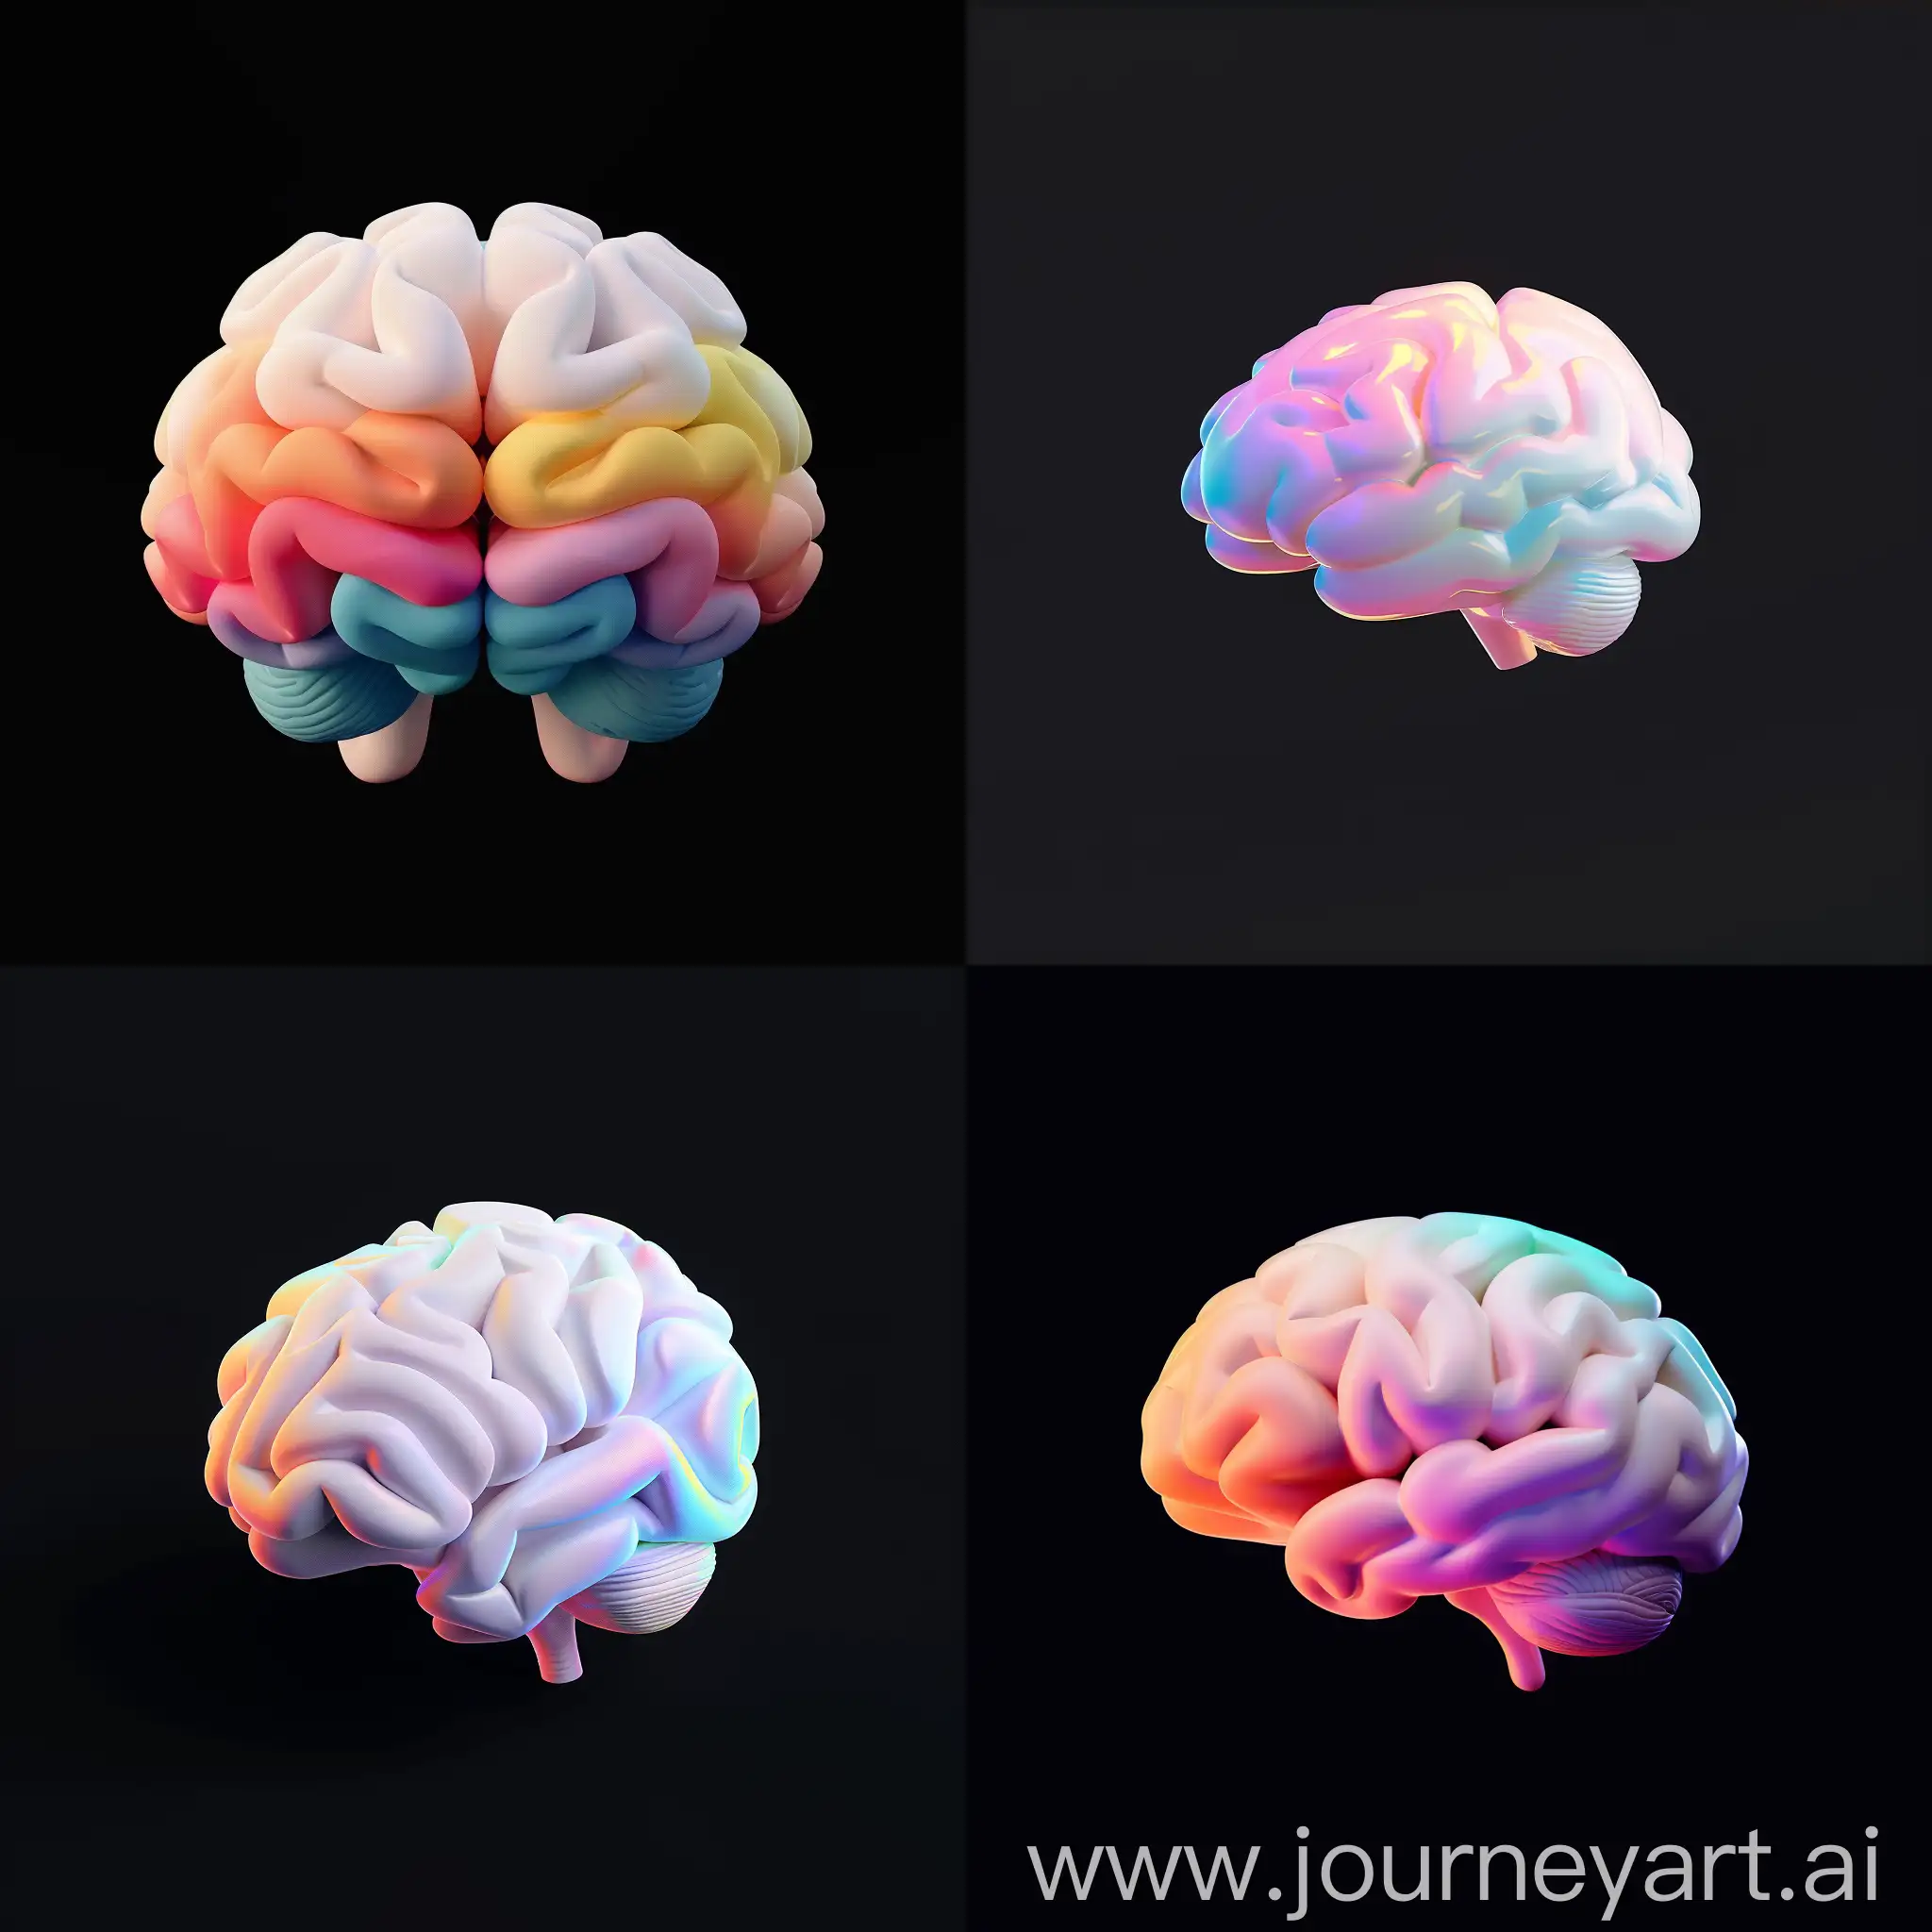 Vibrant-3D-Brain-Icon-with-Cosmic-Shadows-on-Black-Background